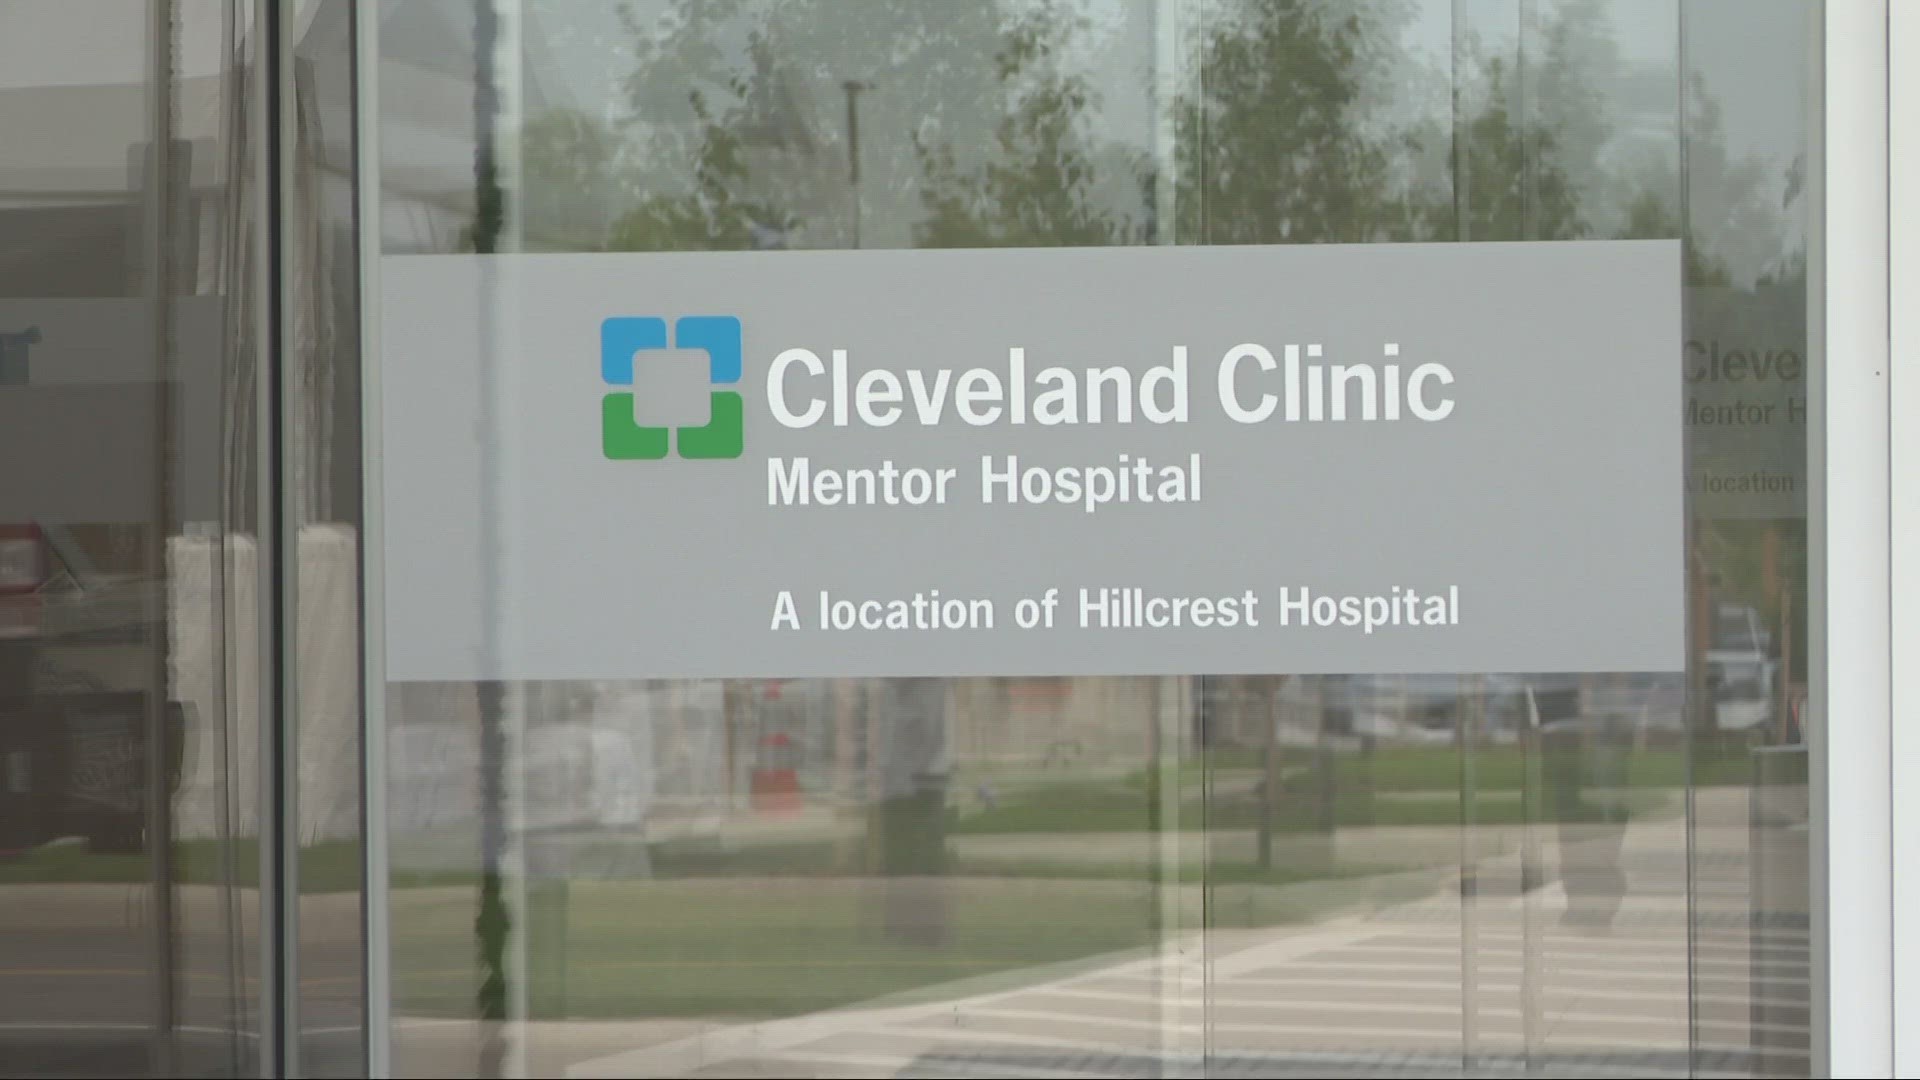 It's the Clinic's first facility in Lake County.